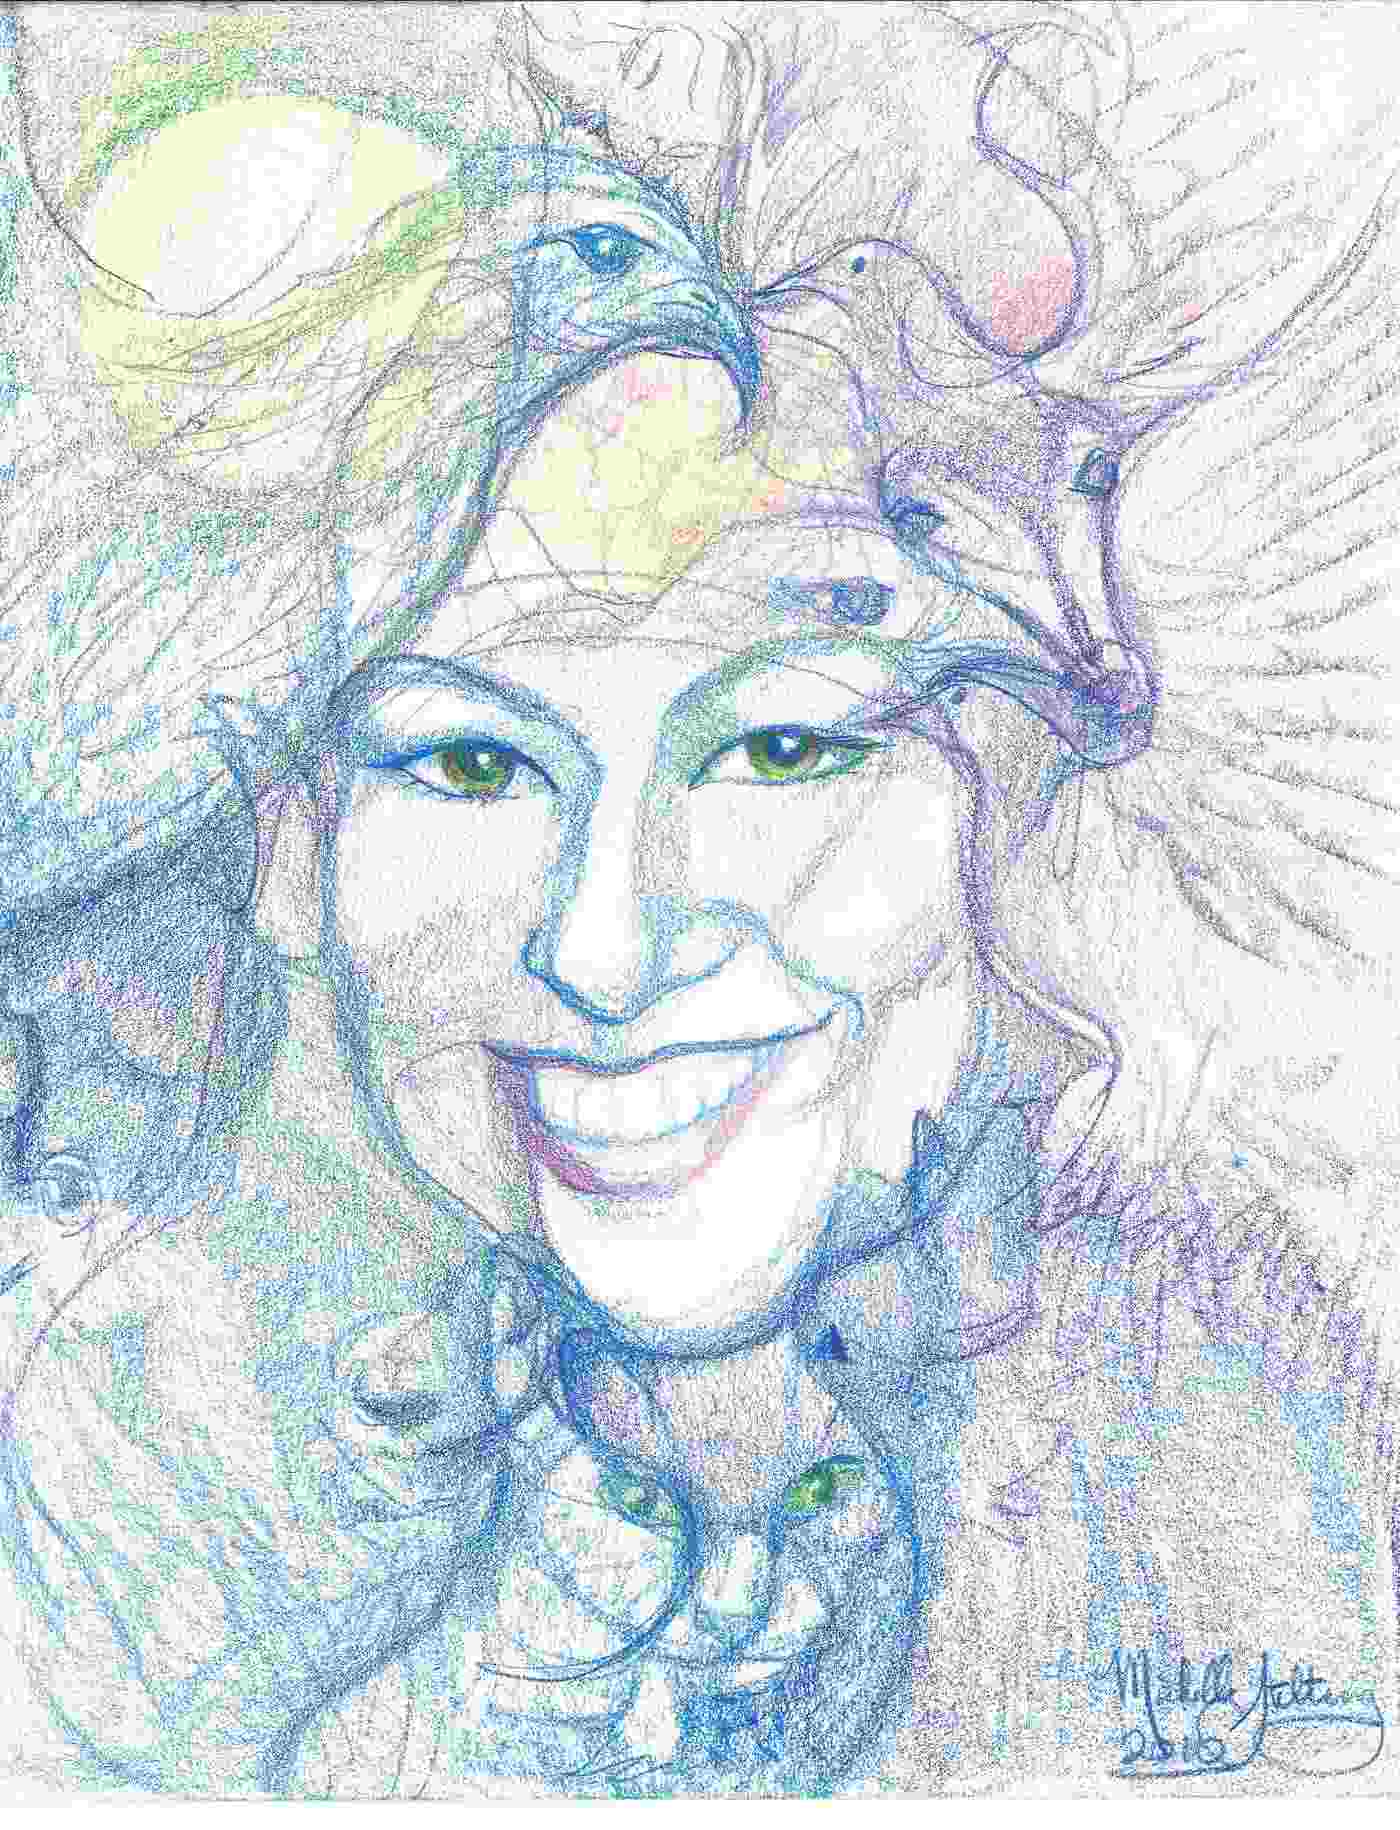 Intuitive portrait by Michelle of my animal totems and spirit guides